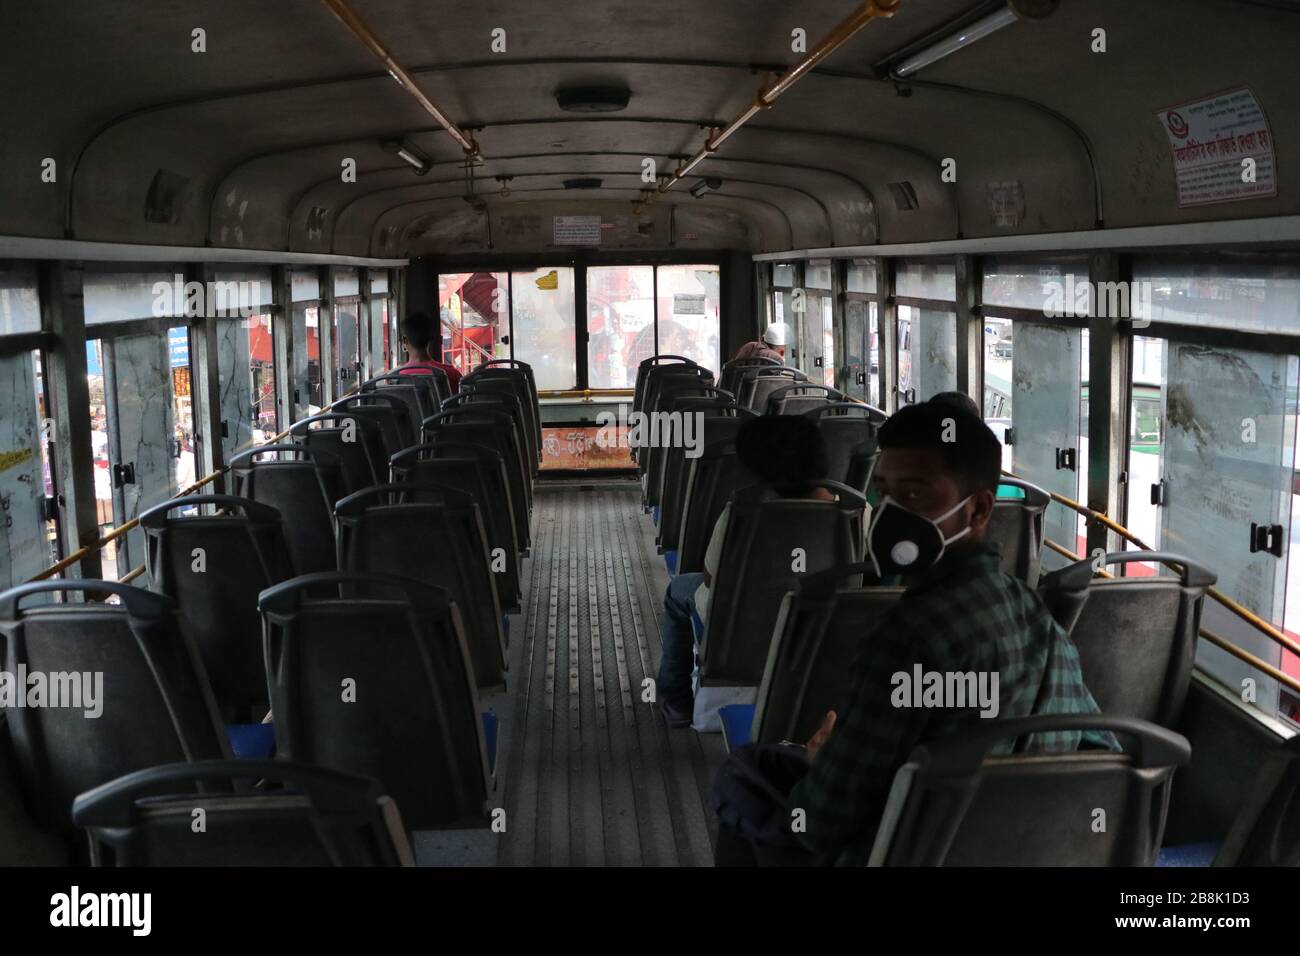 Last day of the weekend, There were very few peoples on the public transport for the coronavirus.© Nazmul Islam / Alamy Stock Photo Stock Photo